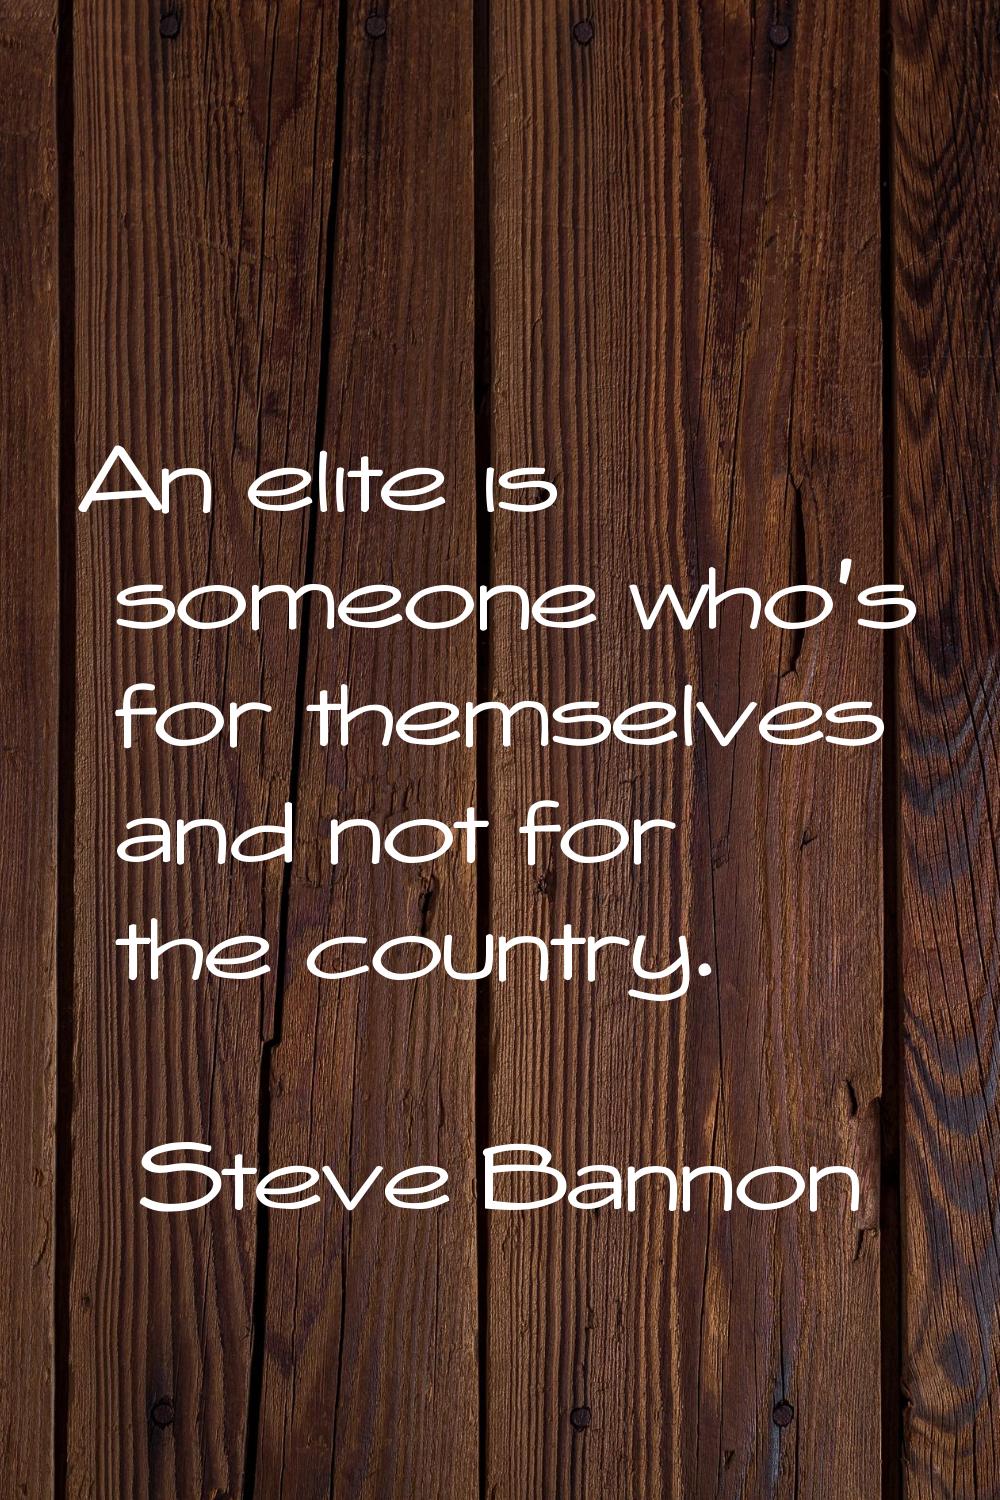 An elite is someone who's for themselves and not for the country.